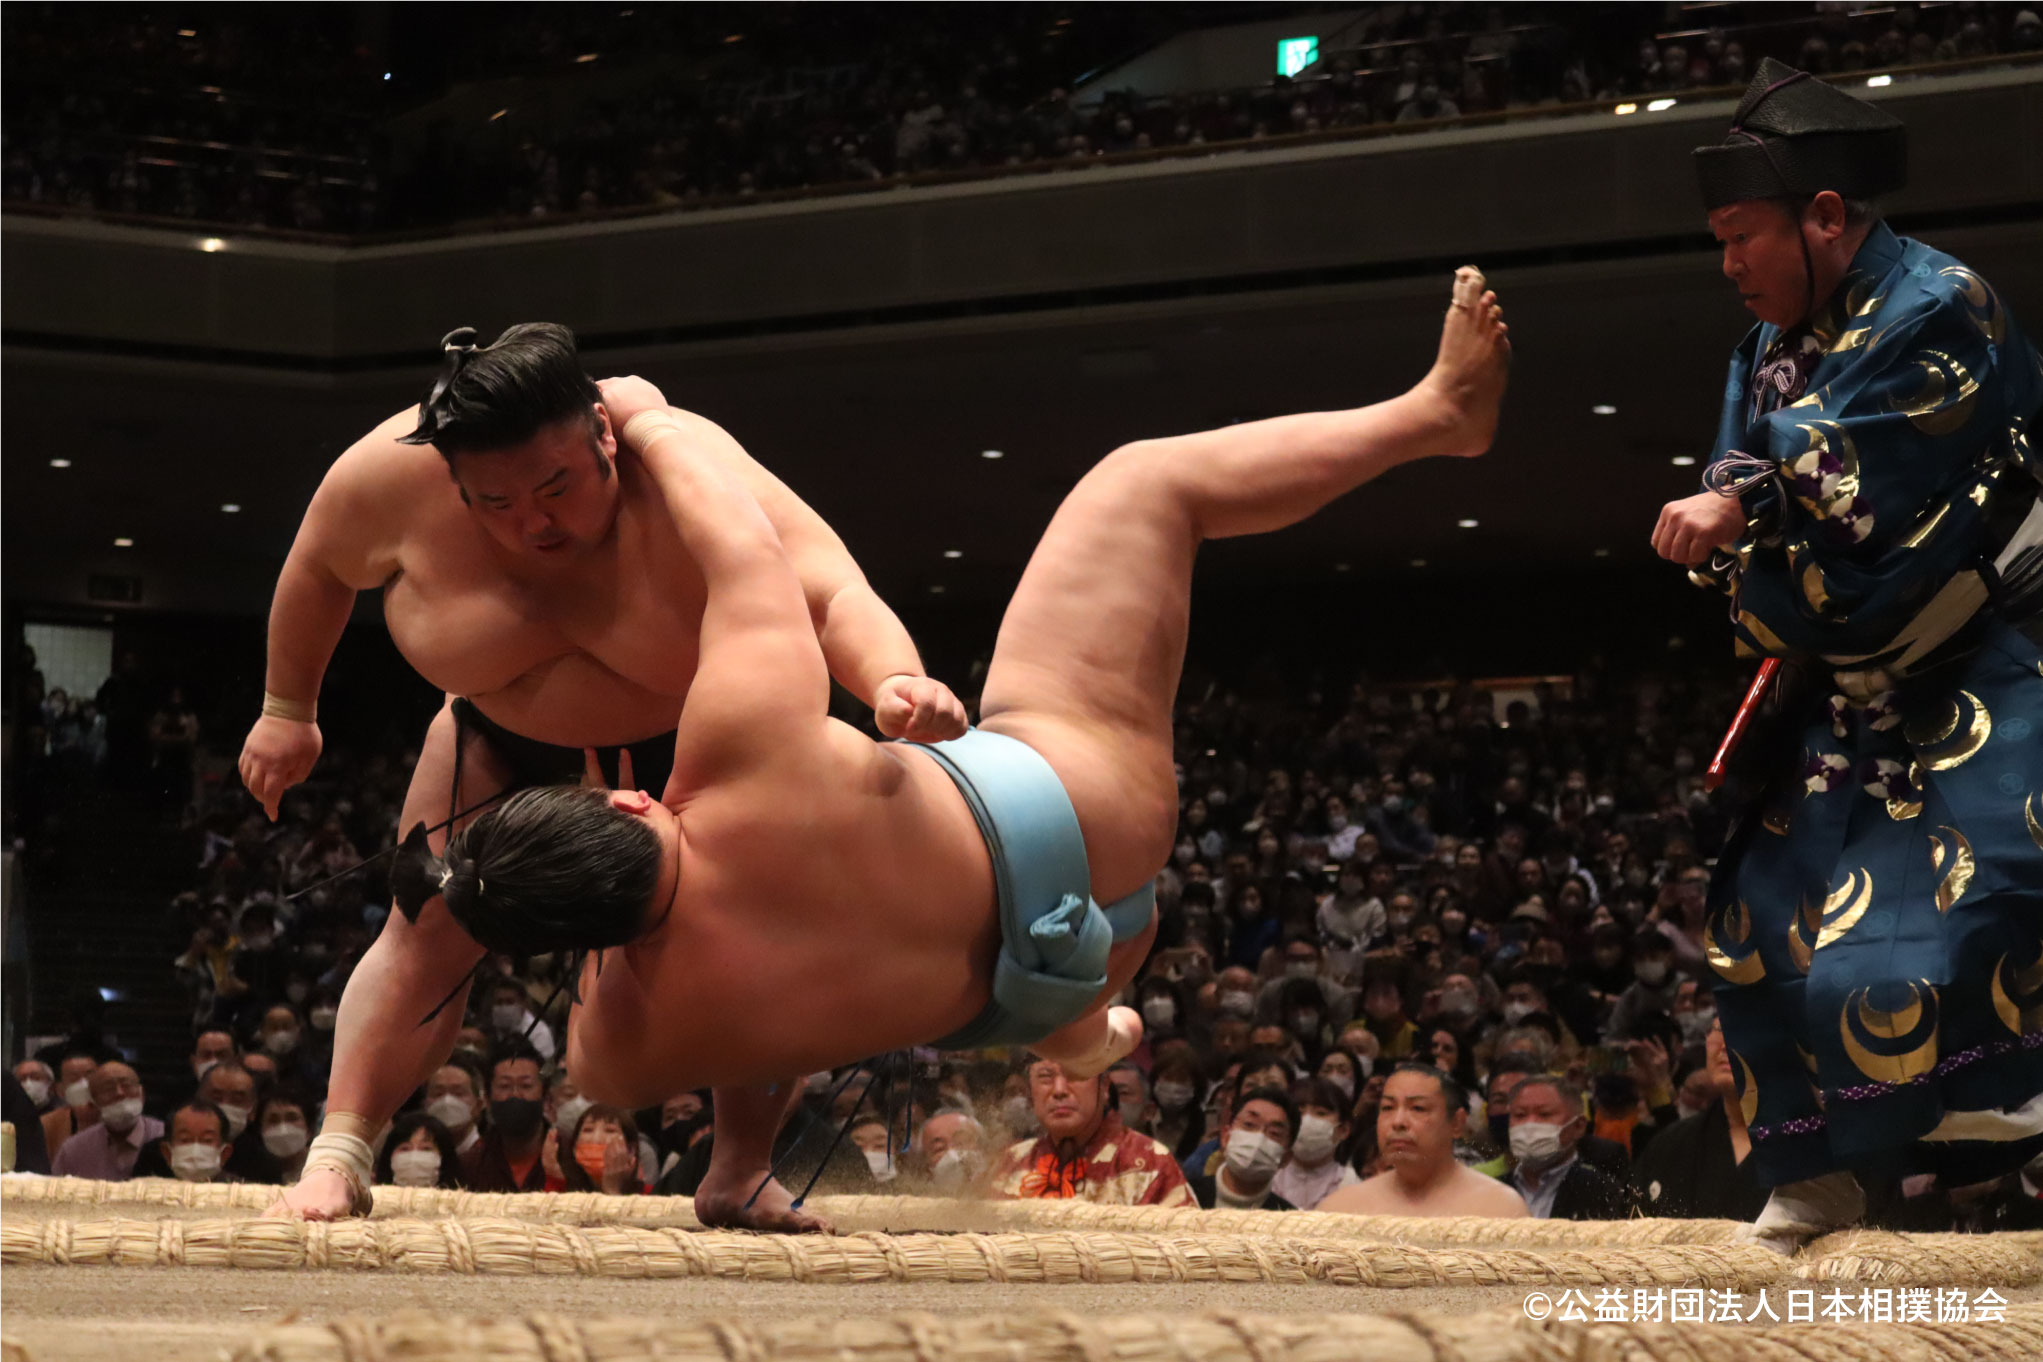 Tokyo Grand Sumo Tournament Viewing Tour (2nd Floor C-class Seat)